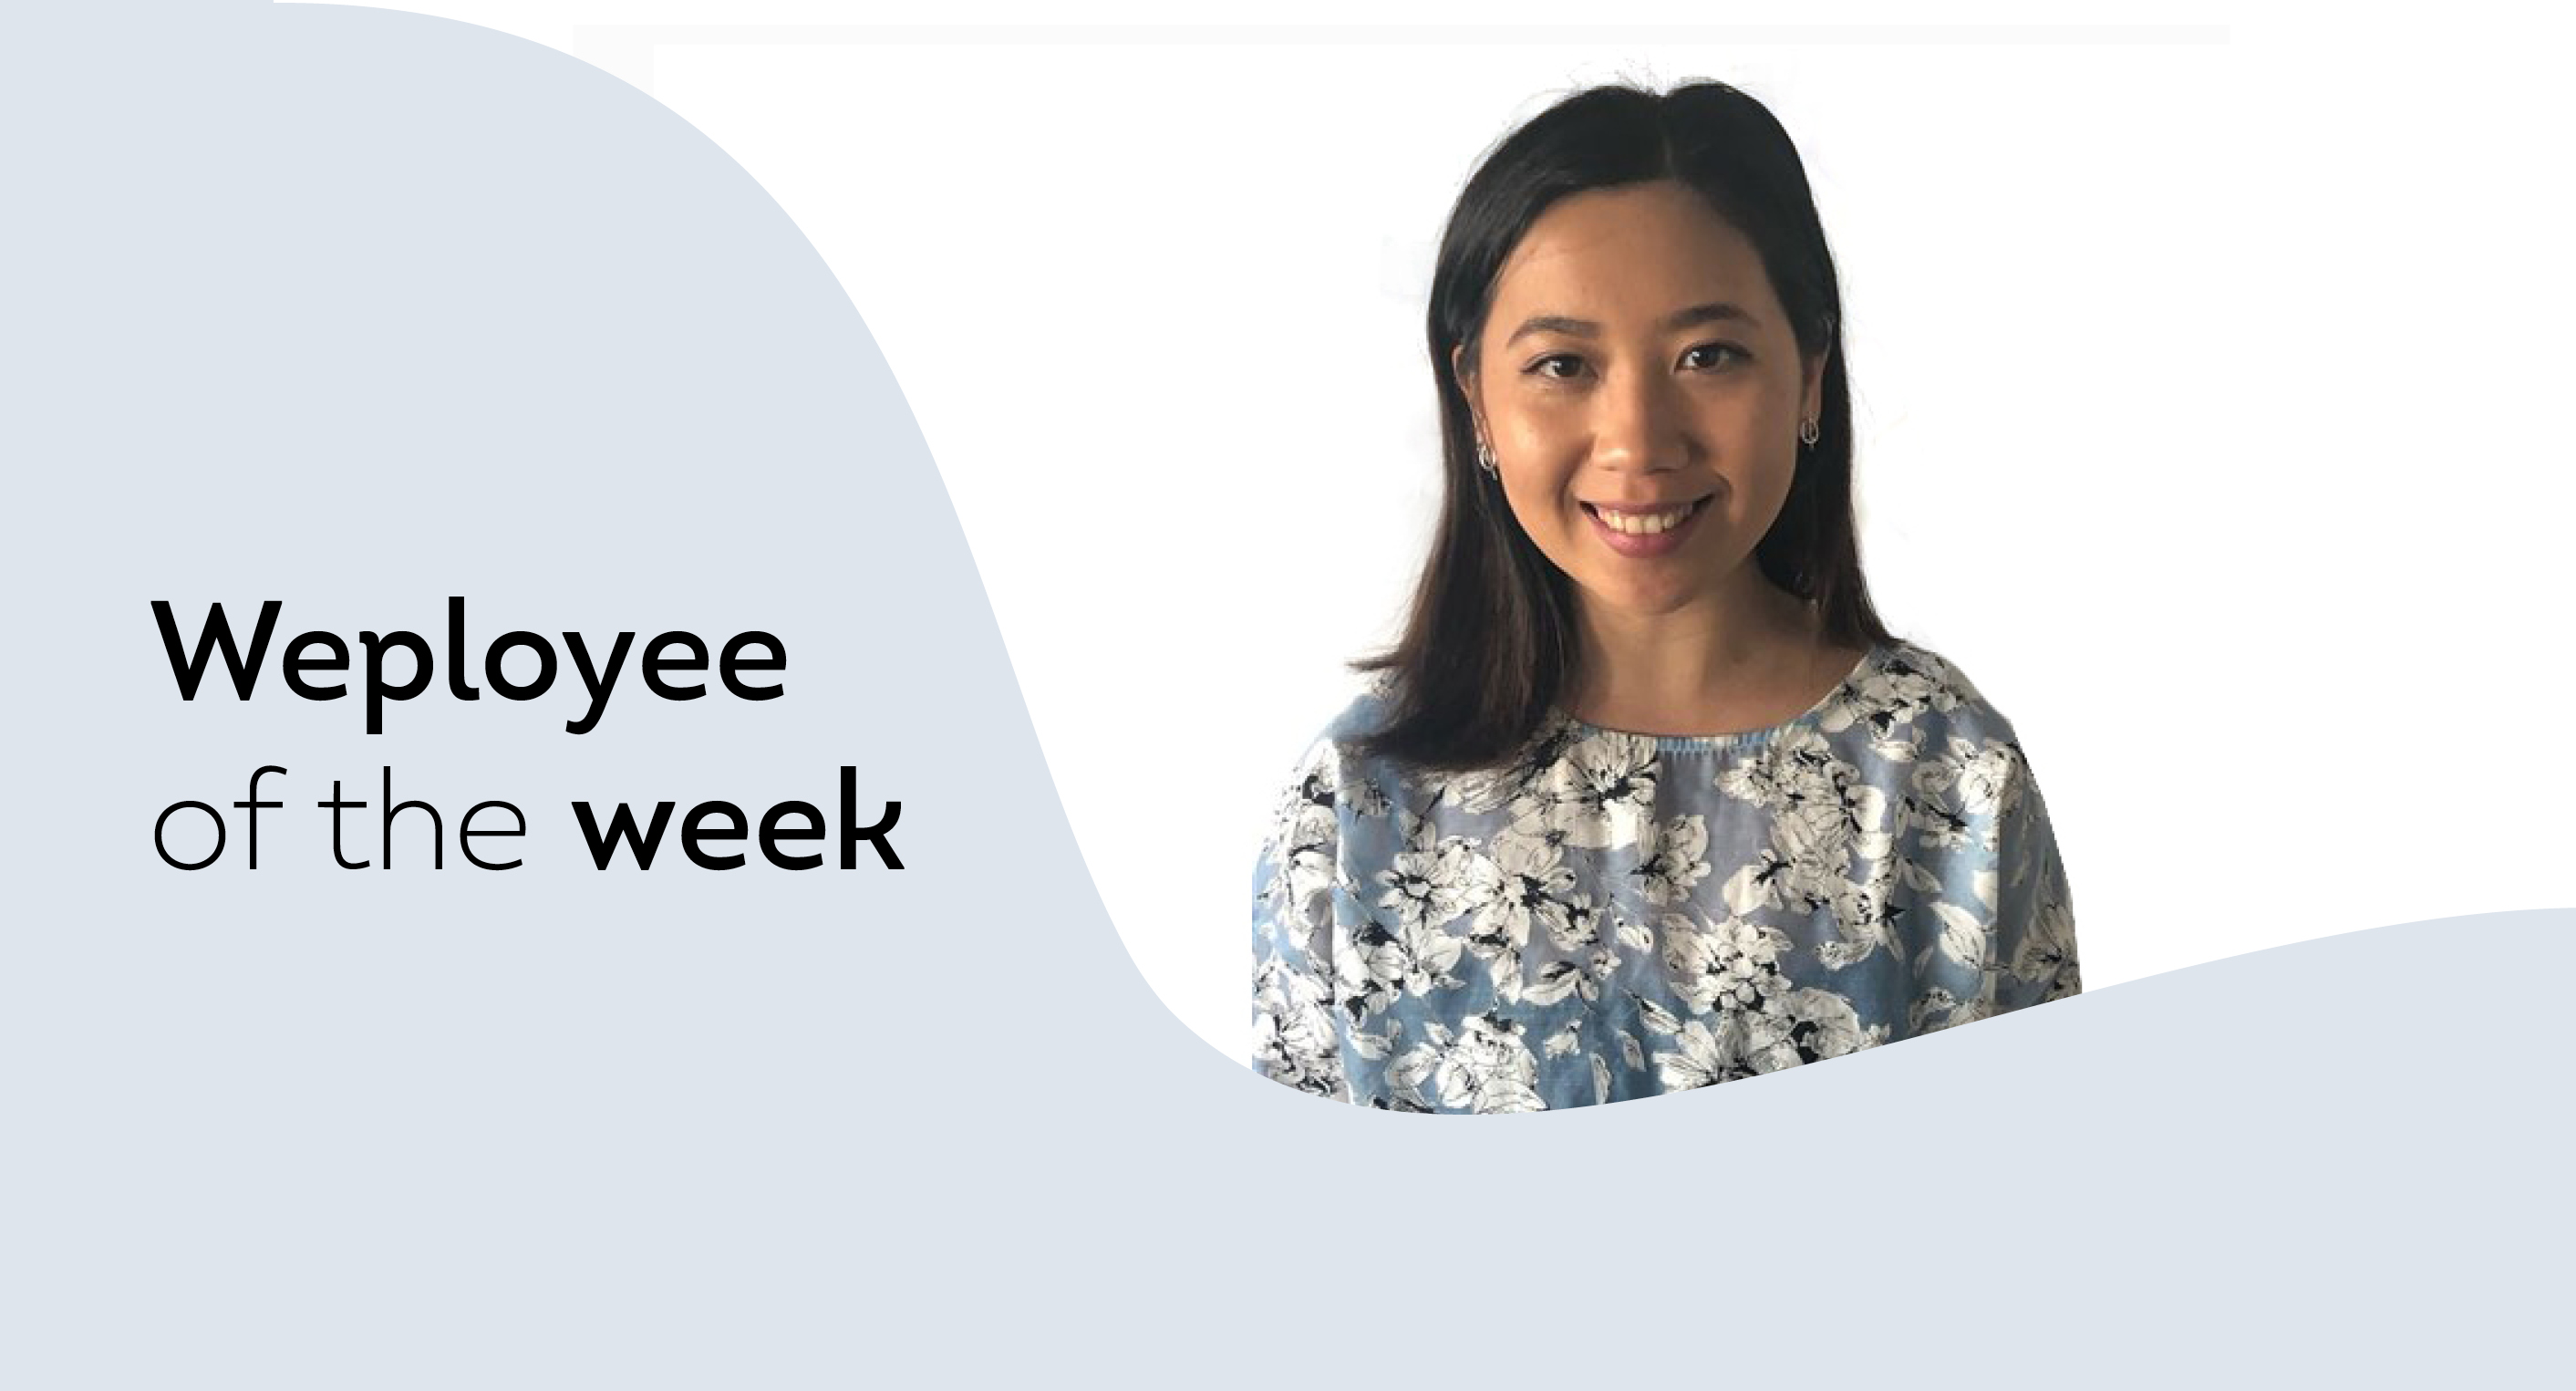 Weployee of the Week Thuy - Featured Image